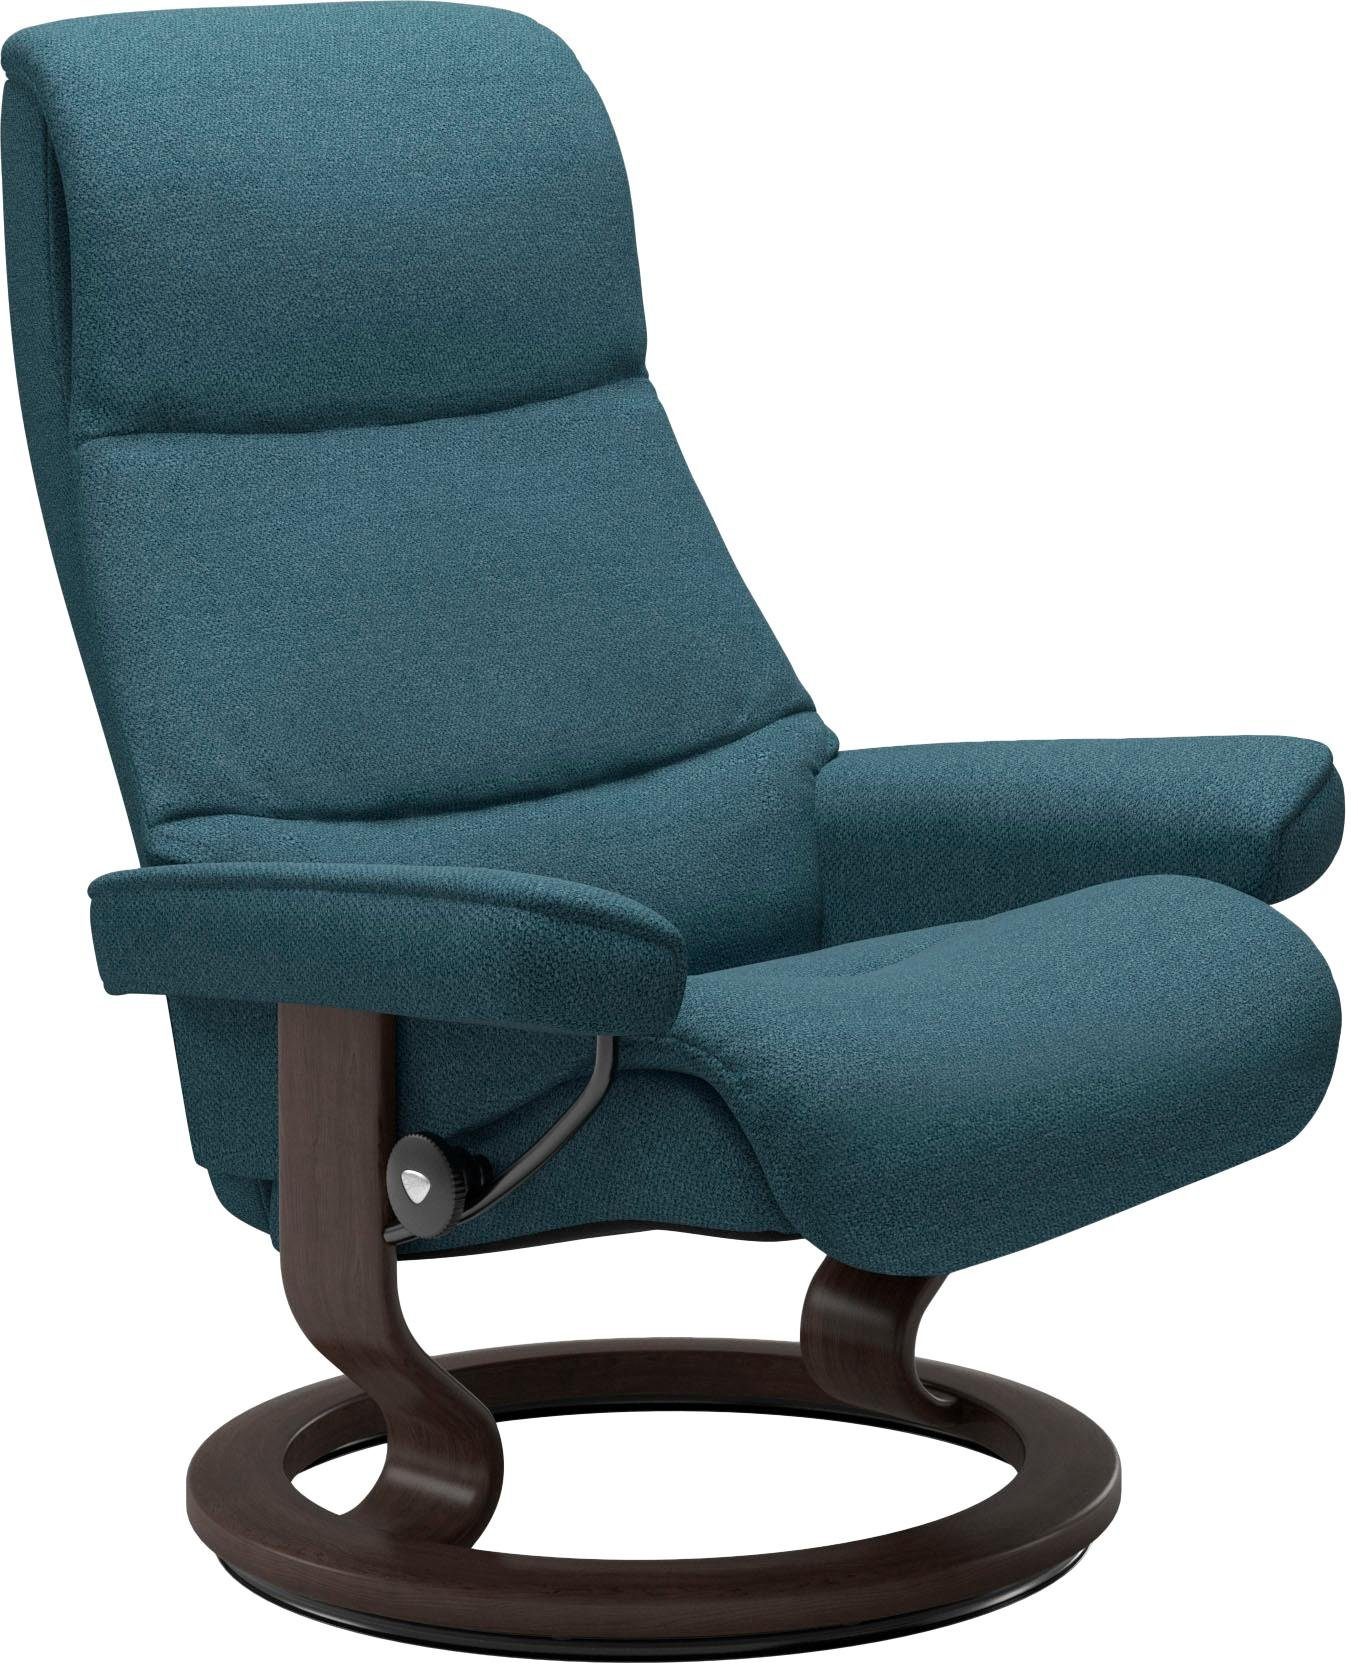 View, Relaxsessel Classic Stressless® mit Wenge Größe M,Gestell Base,